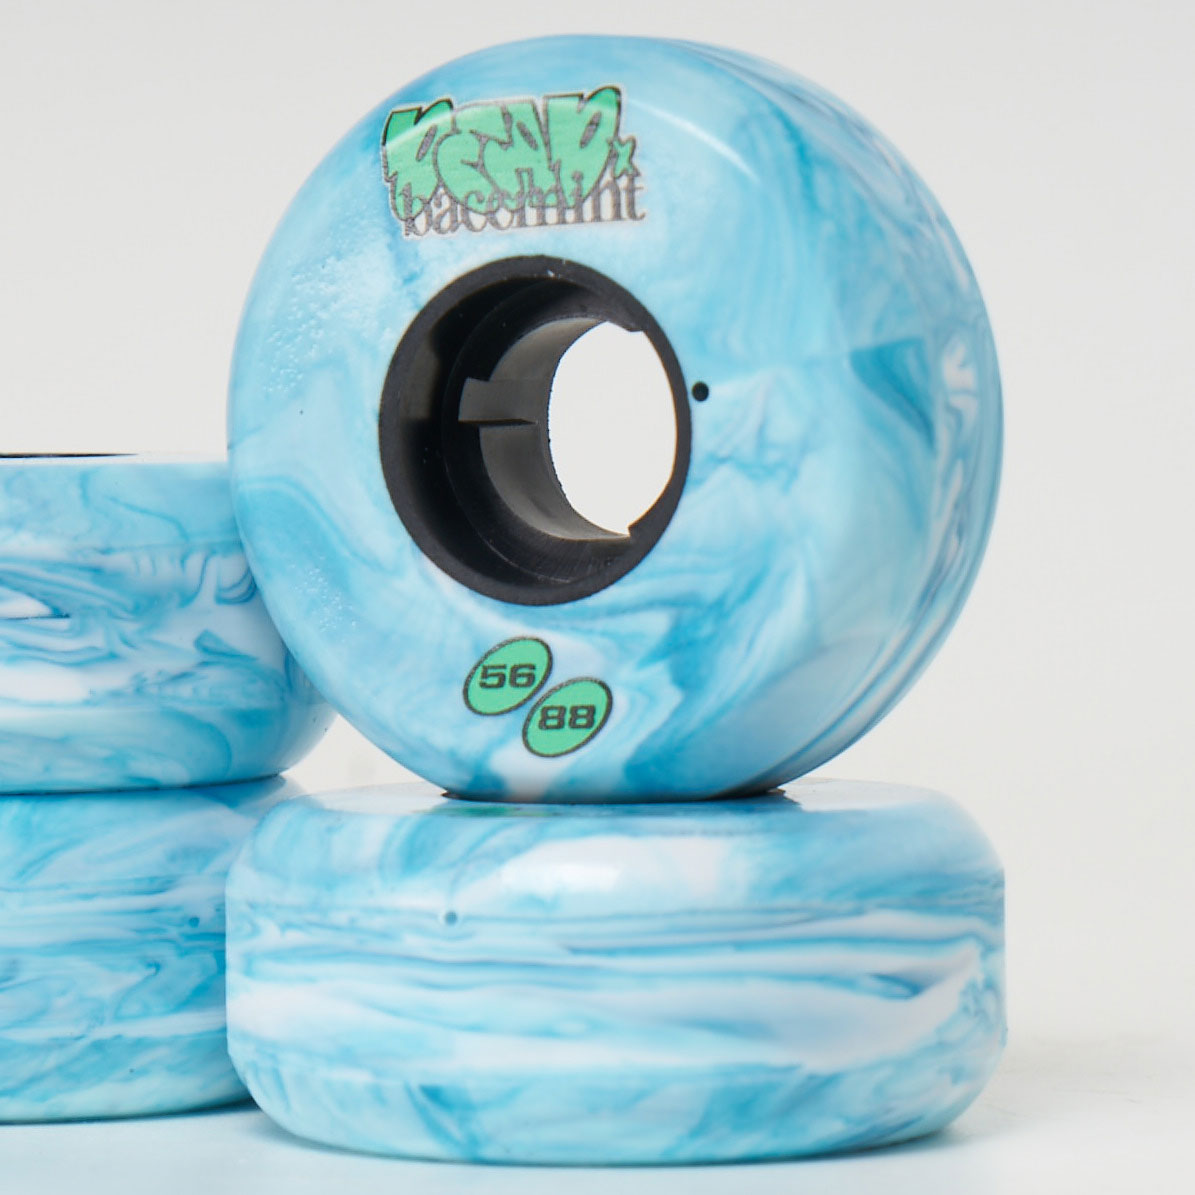 BACEDEAD Dead x Bacemint 56mm/88a Wheels - Blue Marble (4-Pack)